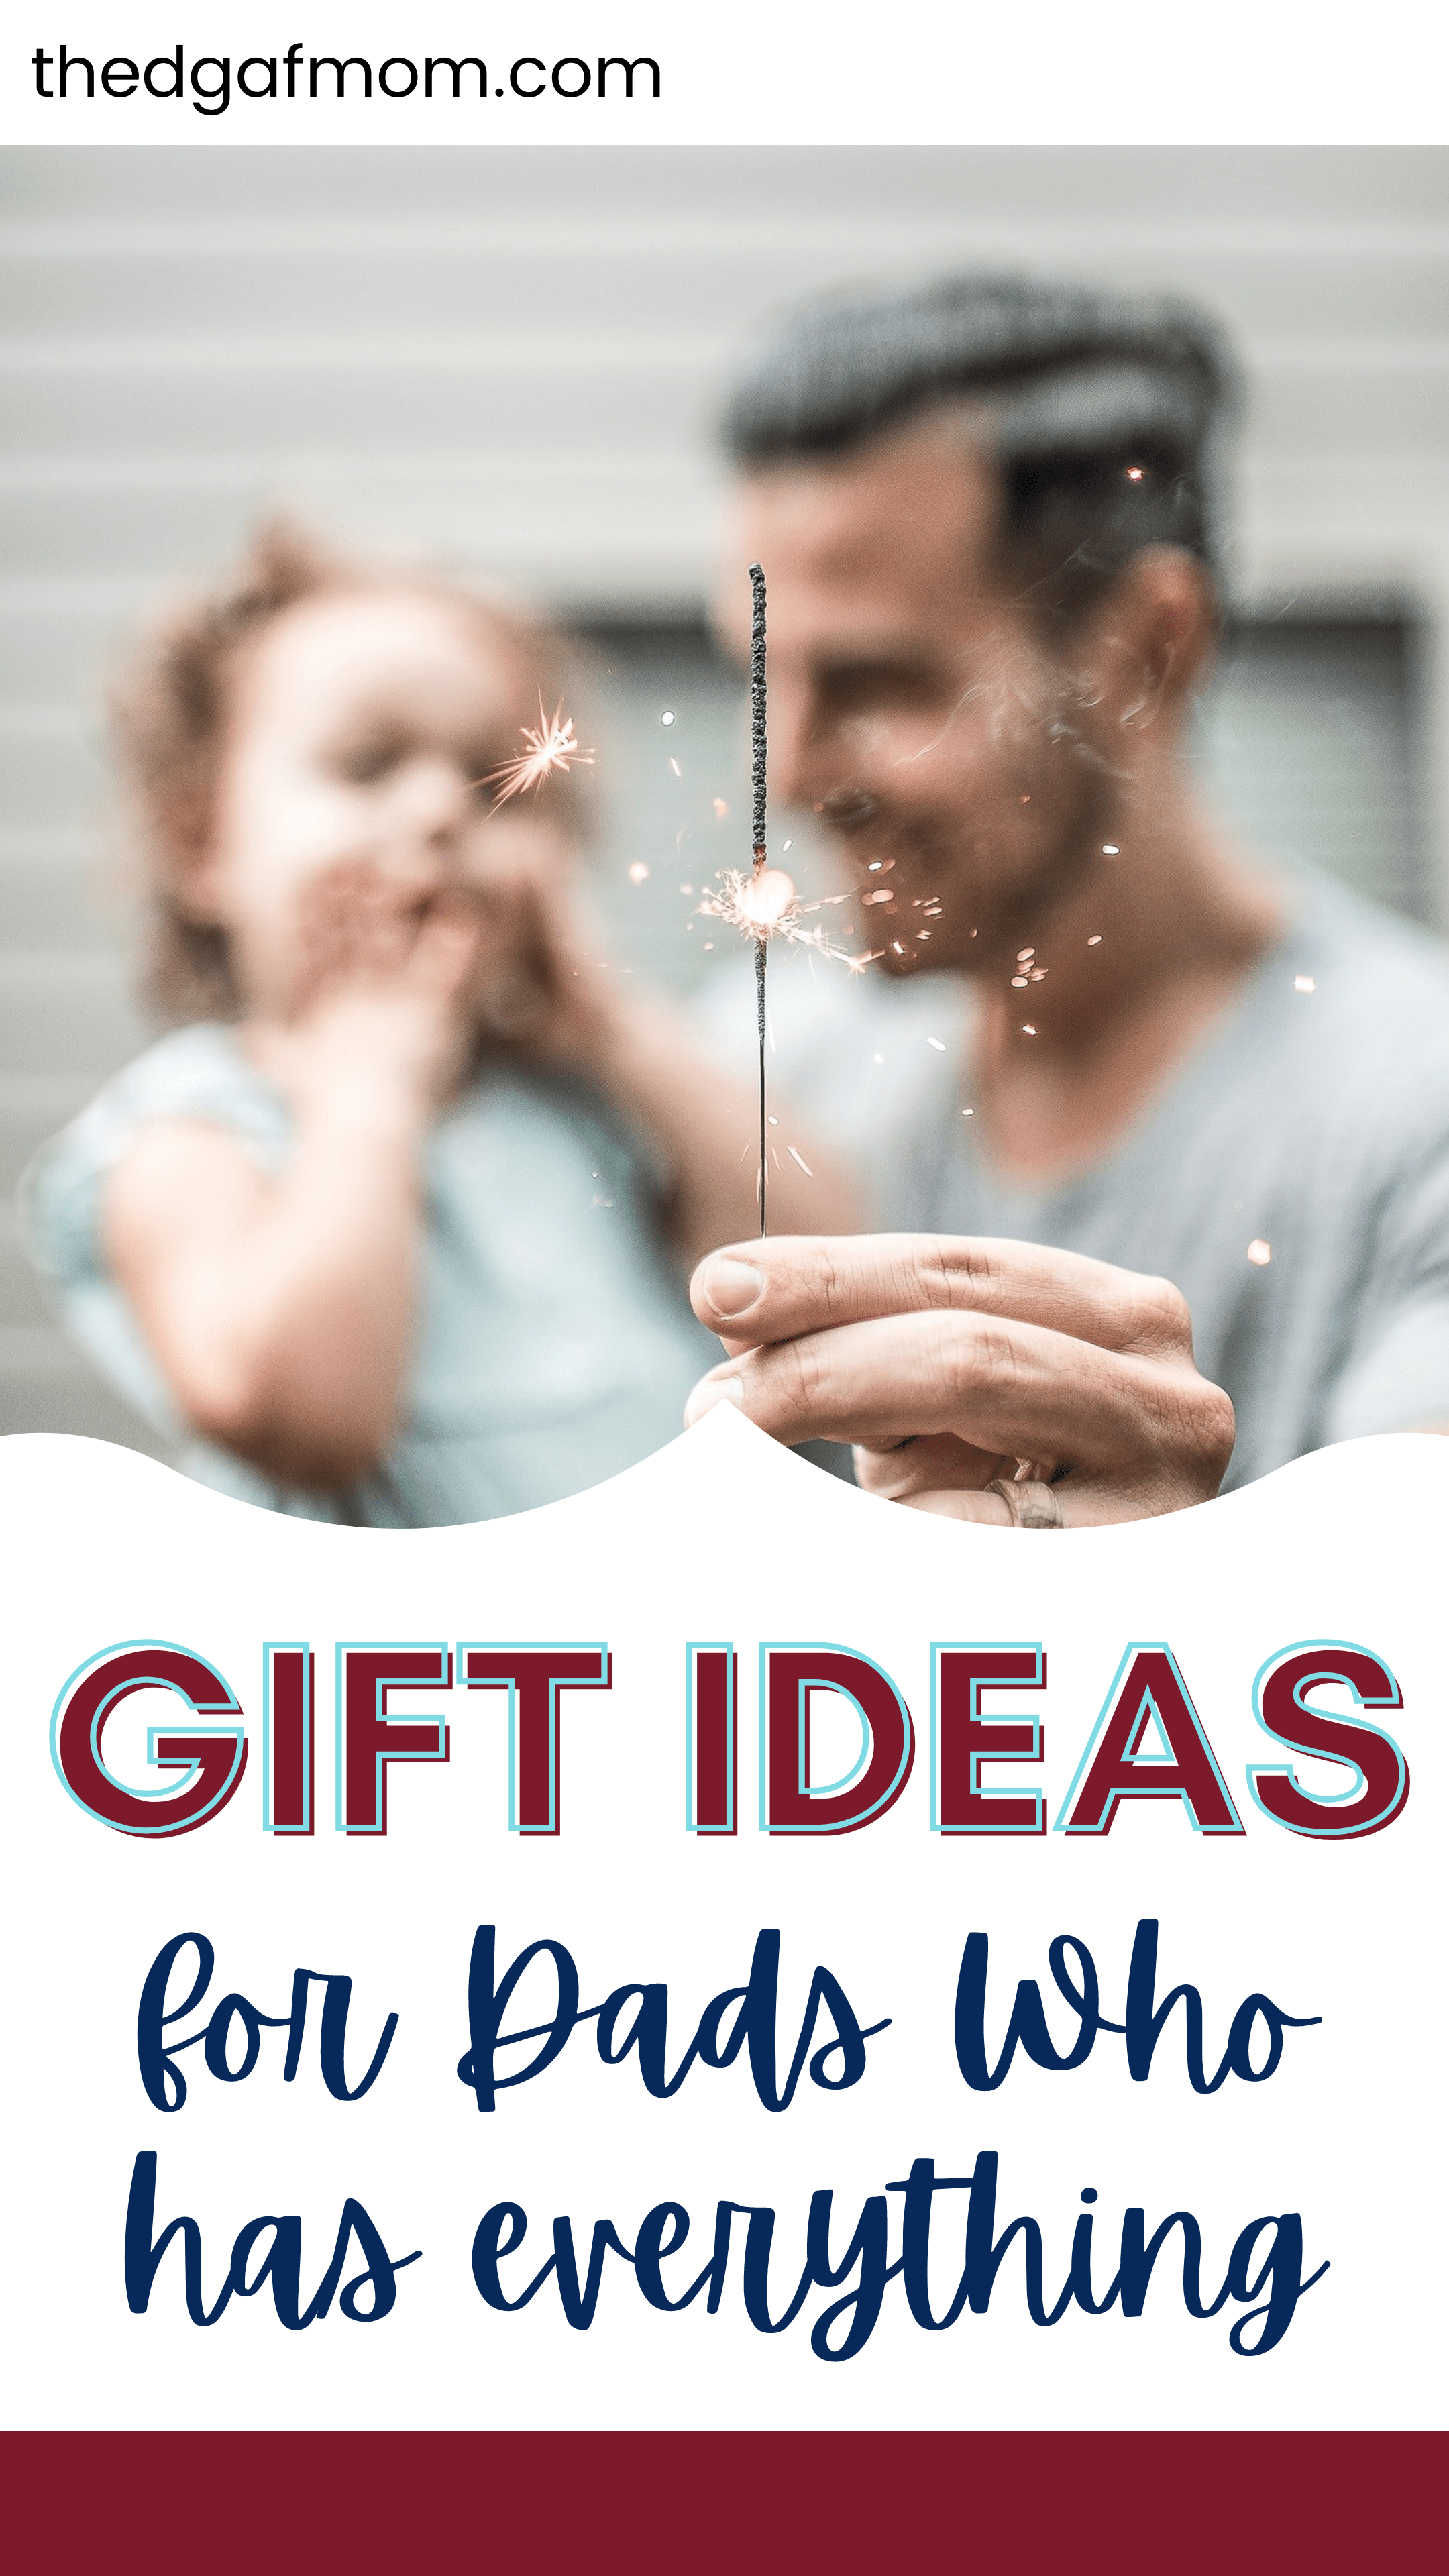 Dad's are difficult to buy gifts for. But not this year! Whether your dad loves new tech gadgets, is into classic watches and ties, or just wants a nice dinner with his family - we've got you covered in our gift guide that includes so many unique gif